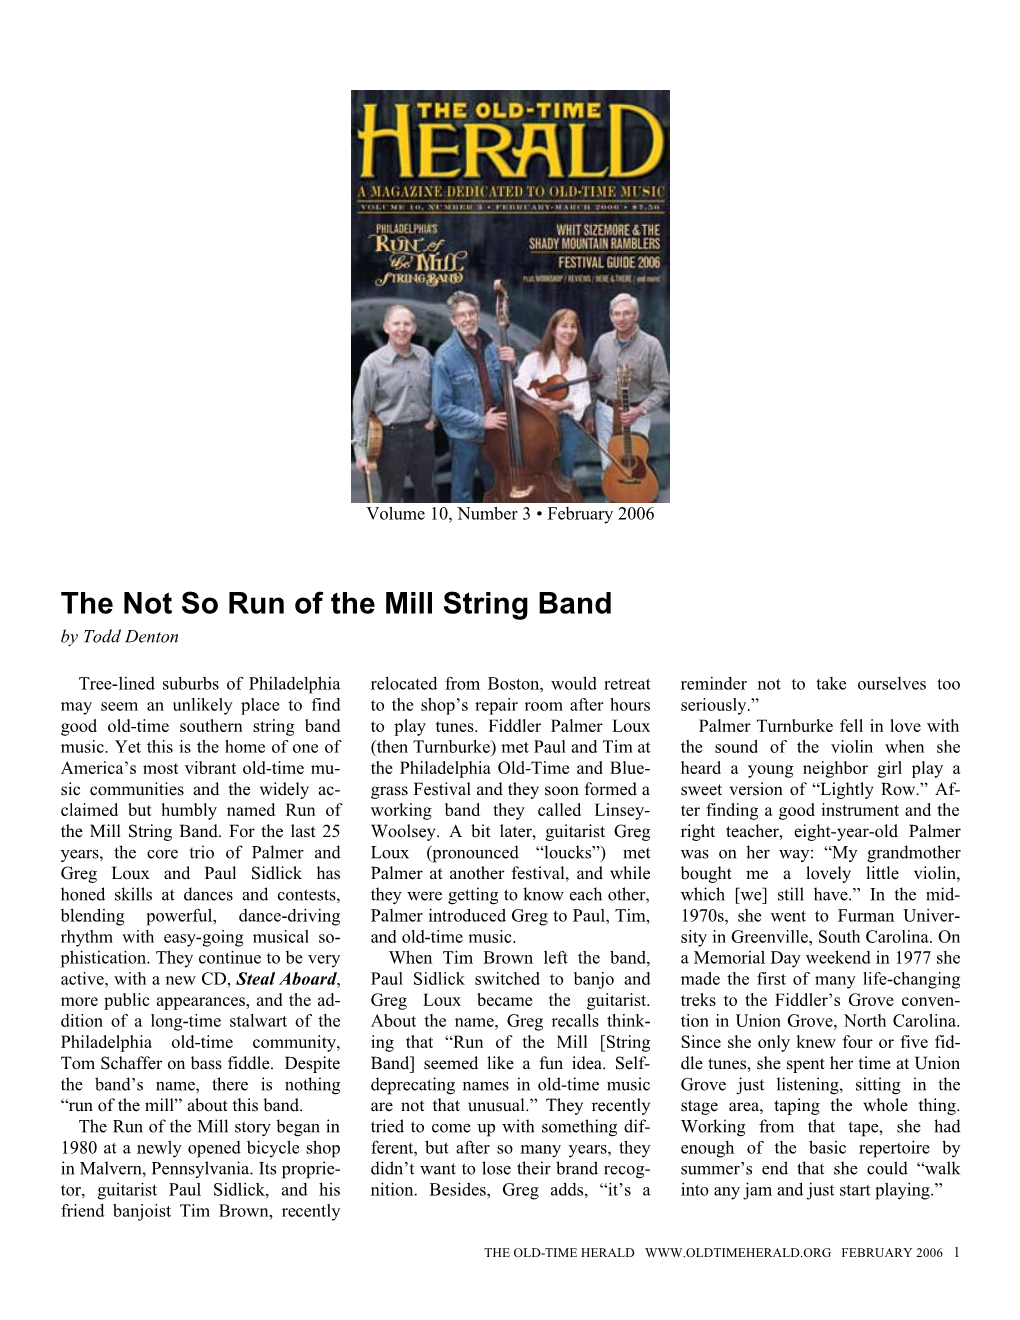 The Not So Run of the Mill String Band by Todd Denton